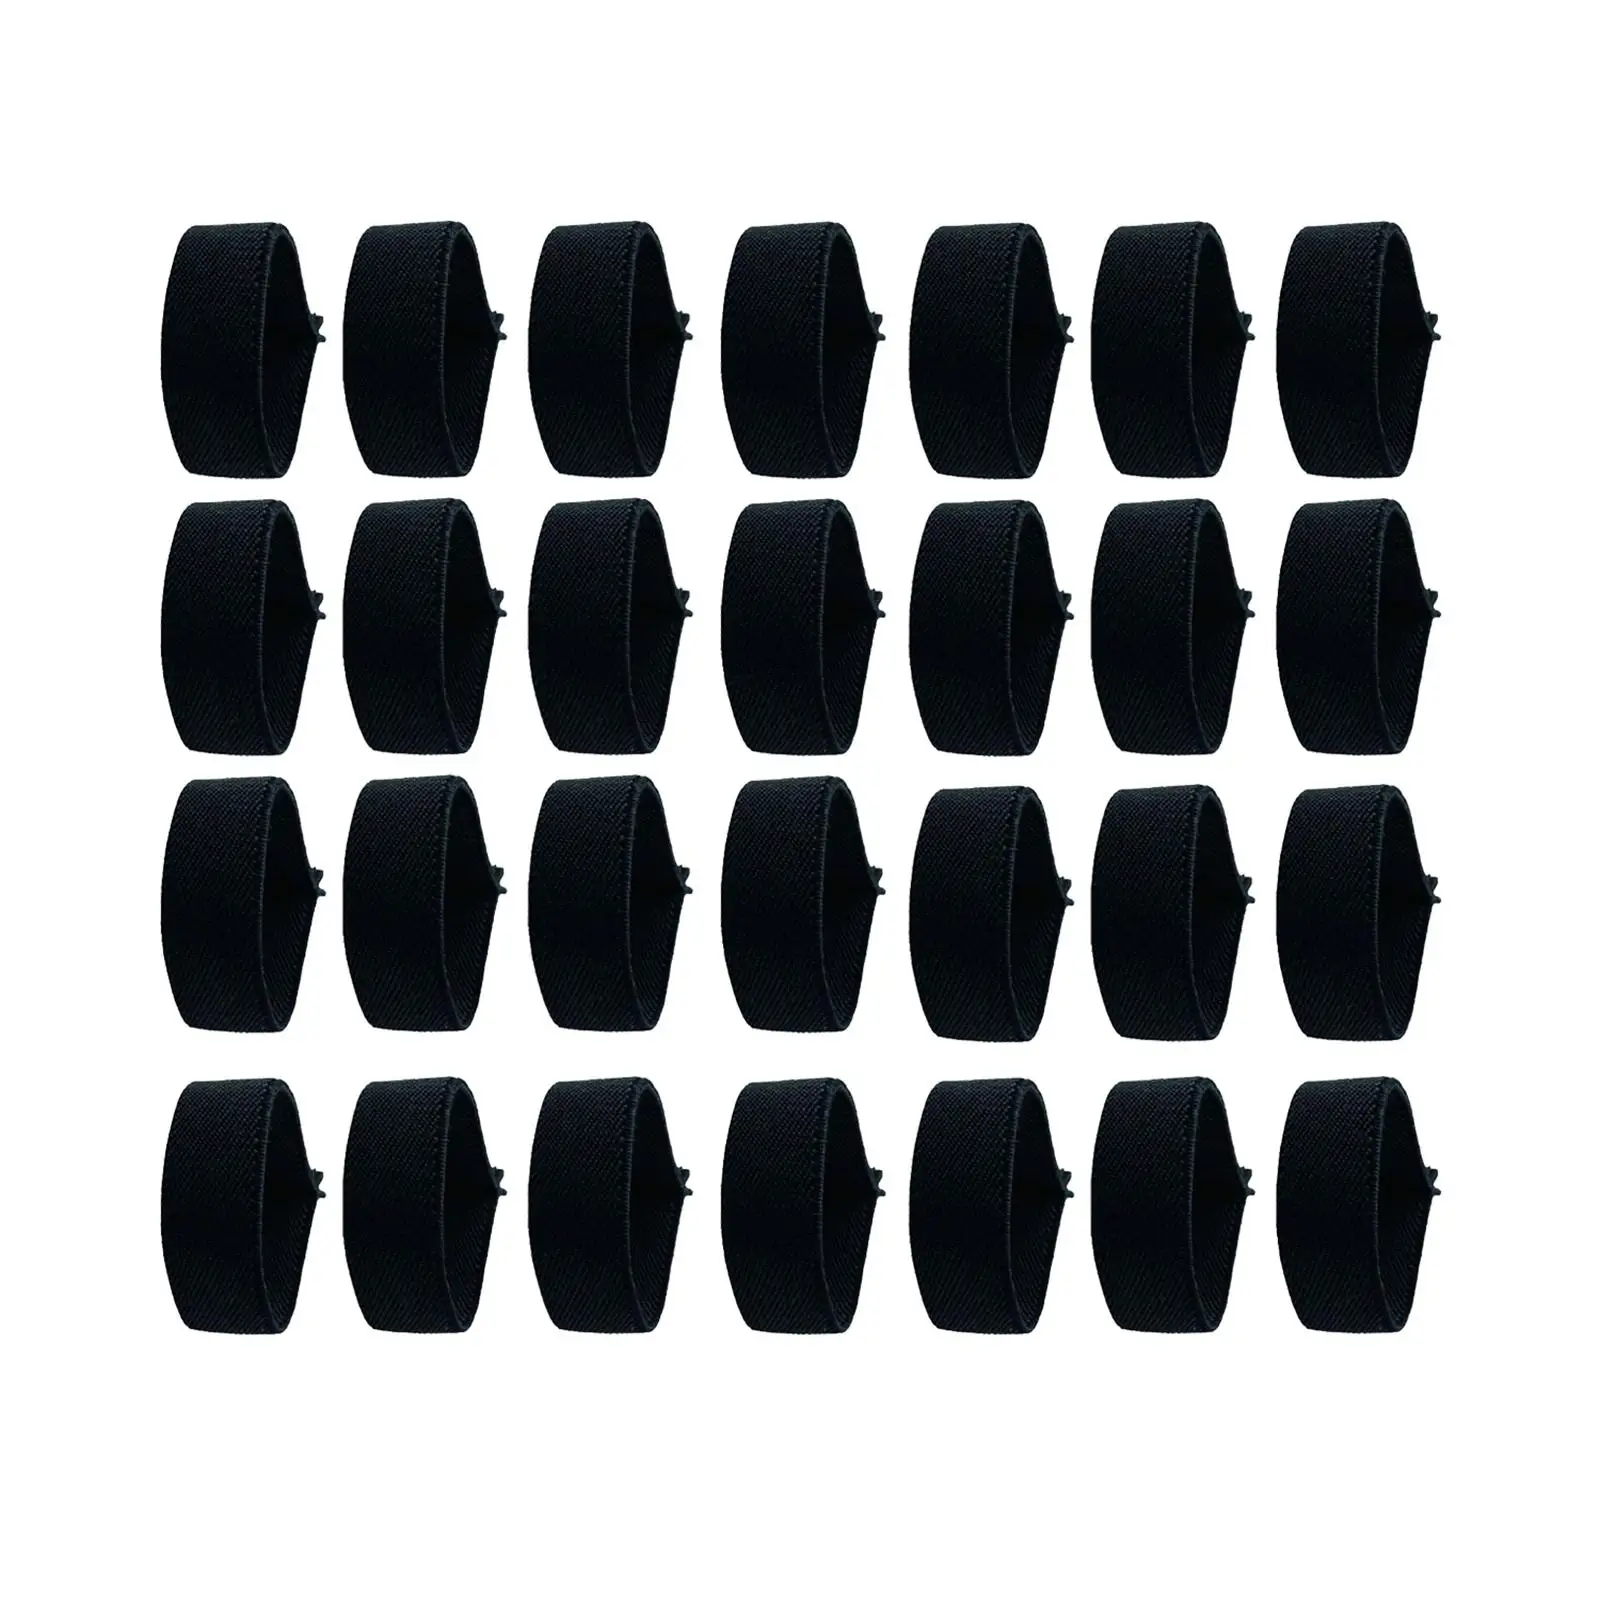 

32Pcs Police Mourning Band Stripe Nylon Respectful Symbol Personnel Memorial Band Funeral Honor Guard Strap for Police Badges